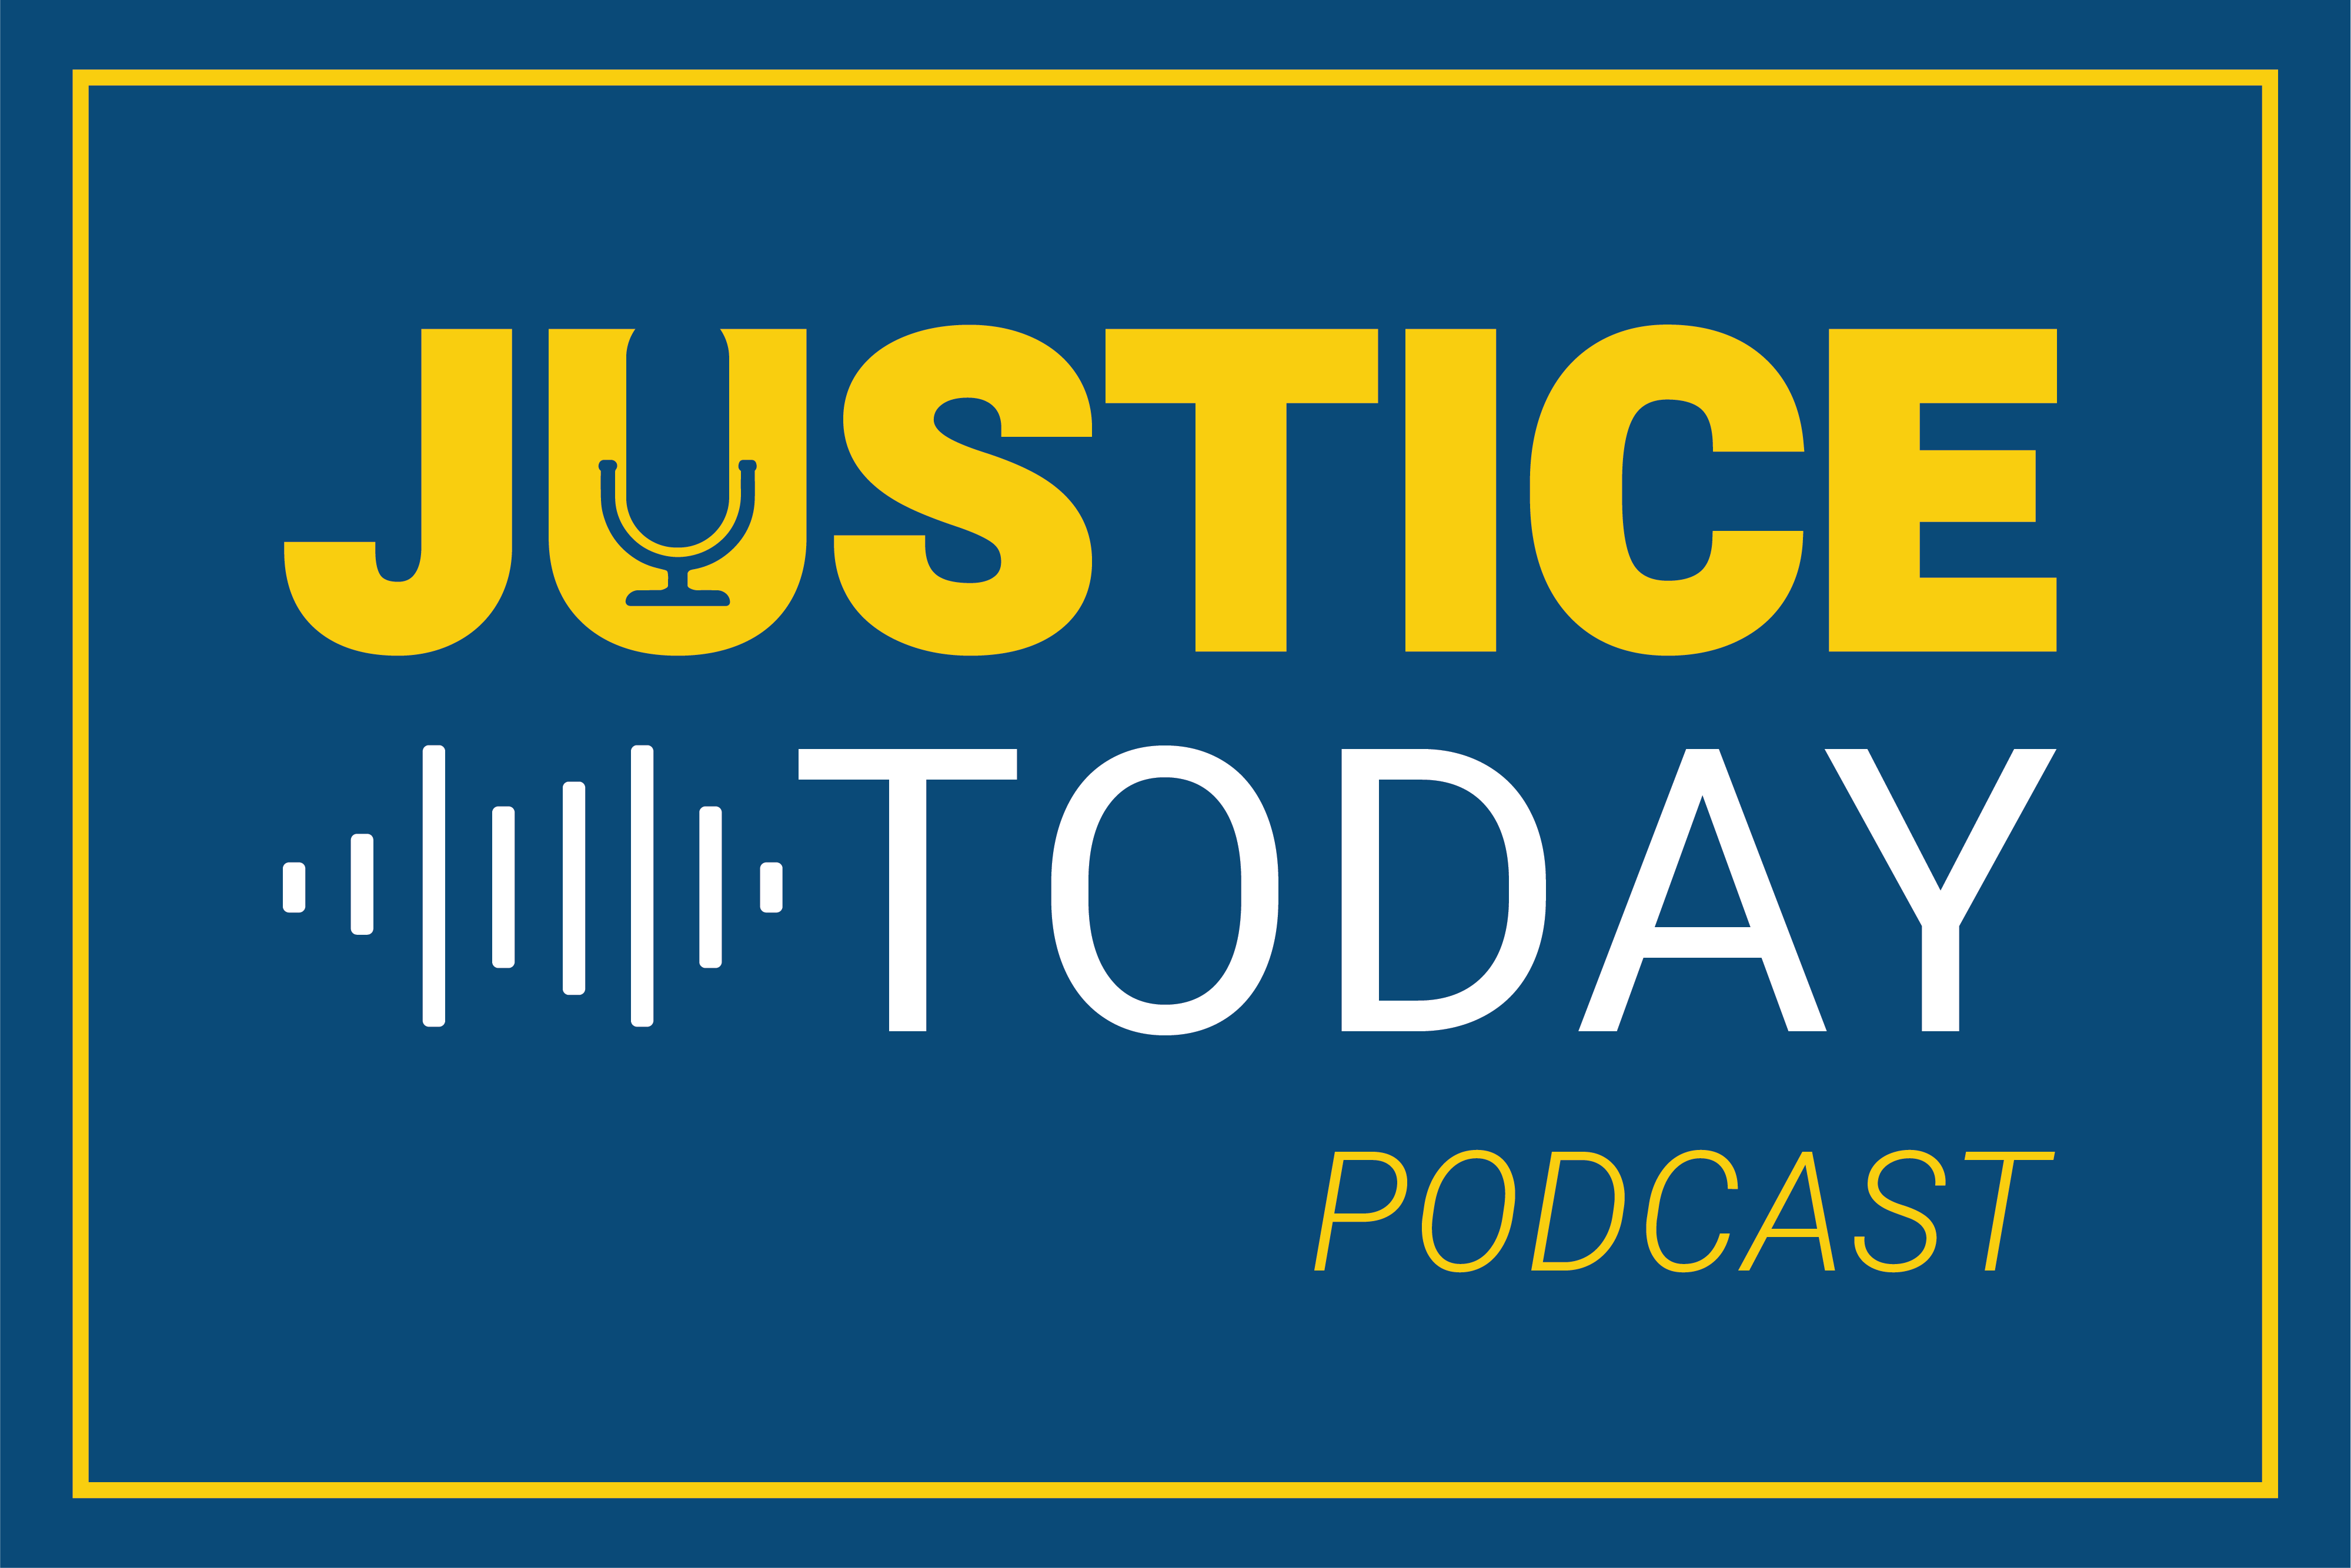 Listen to the Justice Today podcast episode